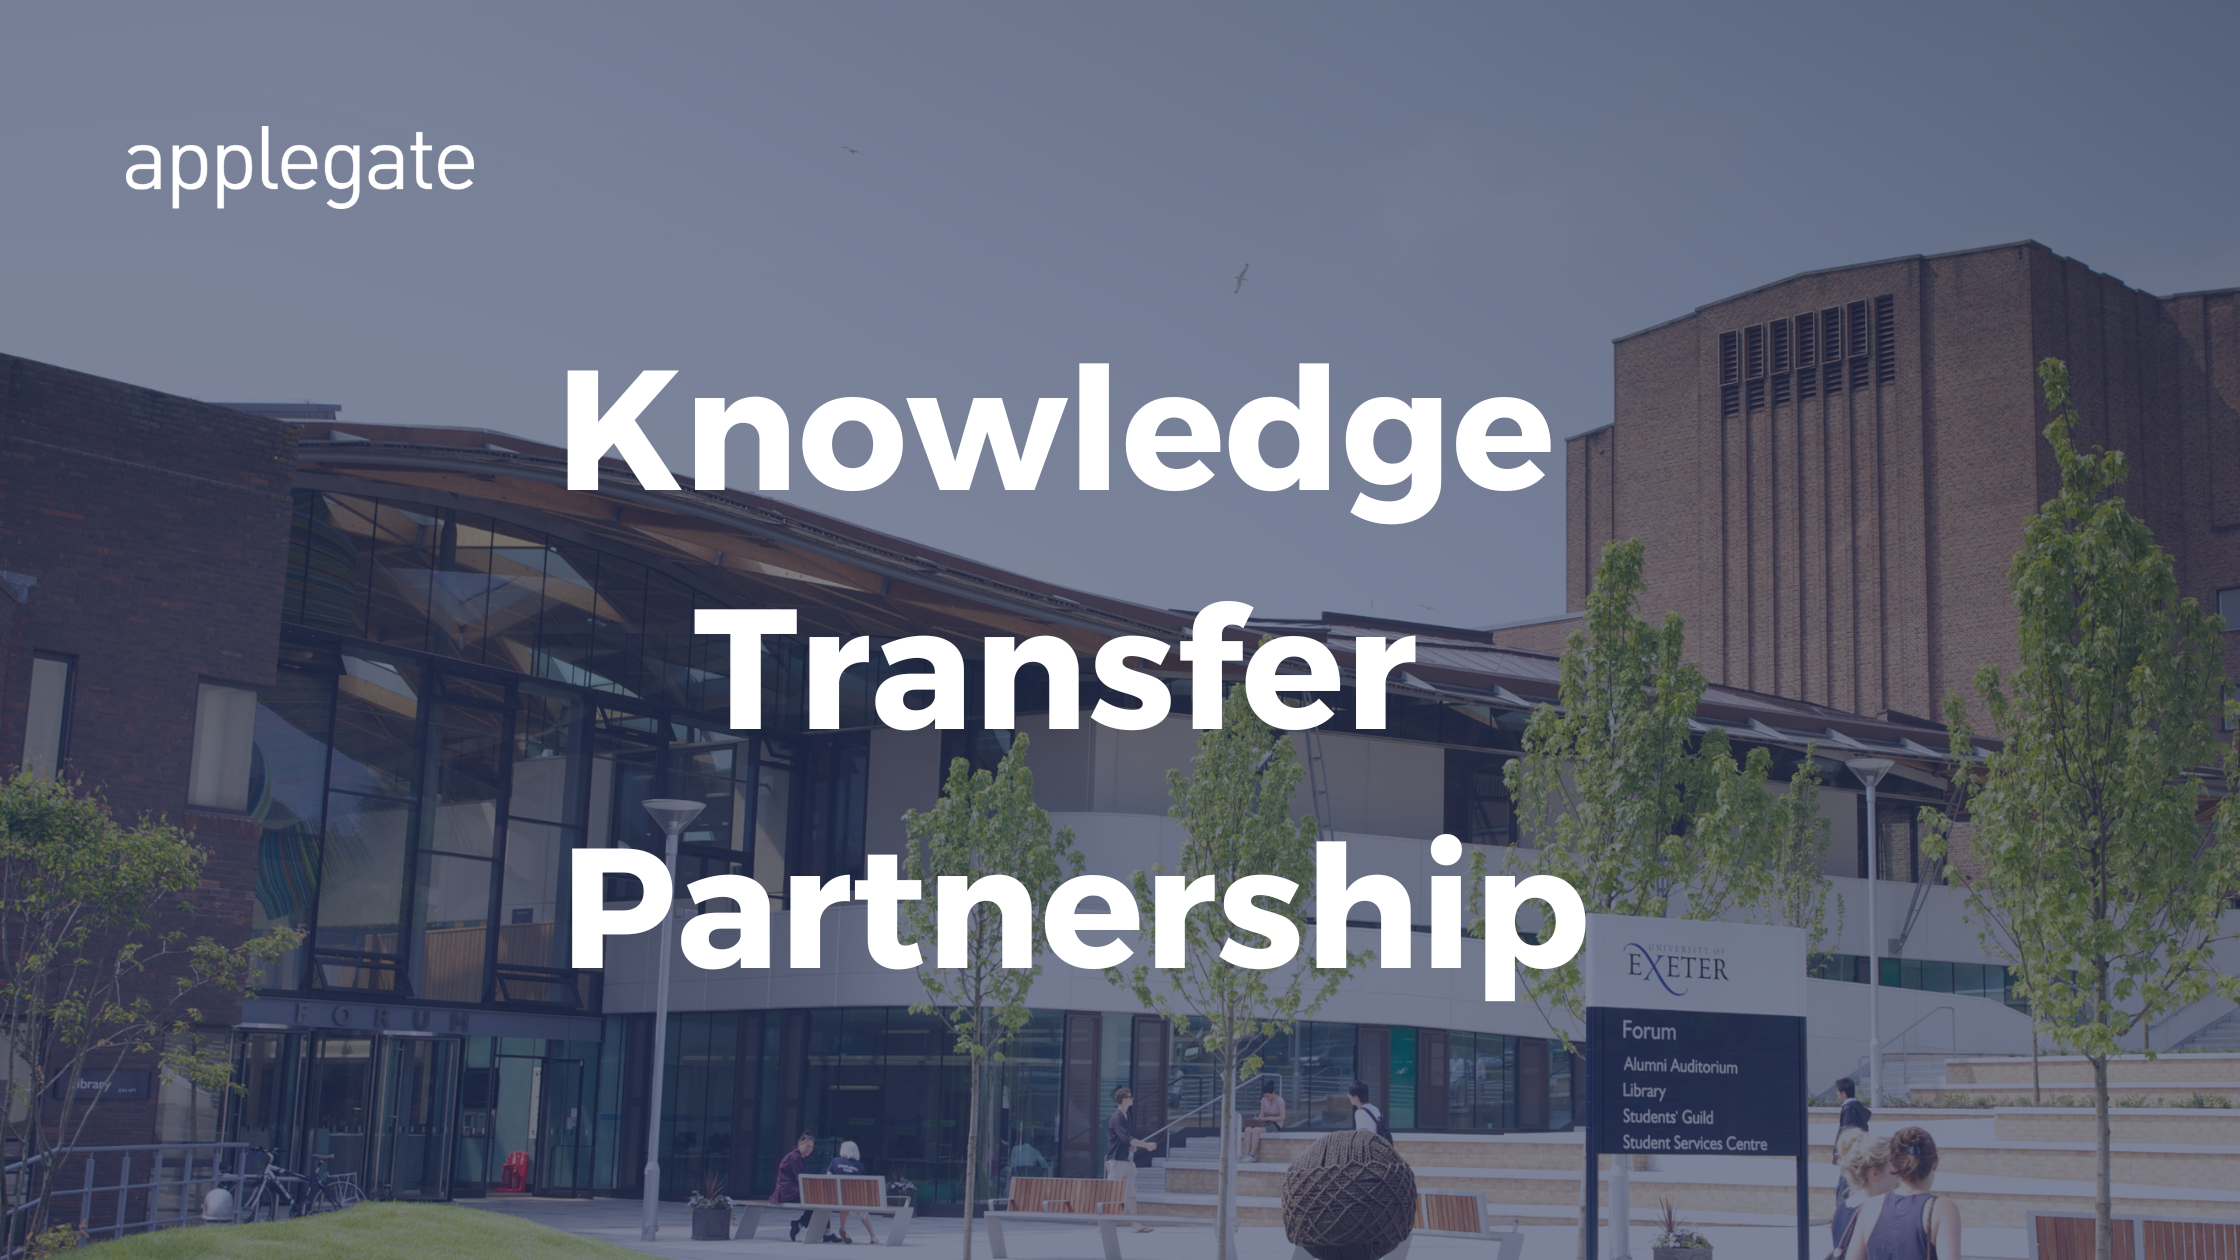 Applegate and the University of Exeter collaborate on a Knowledge Transfer Partnership